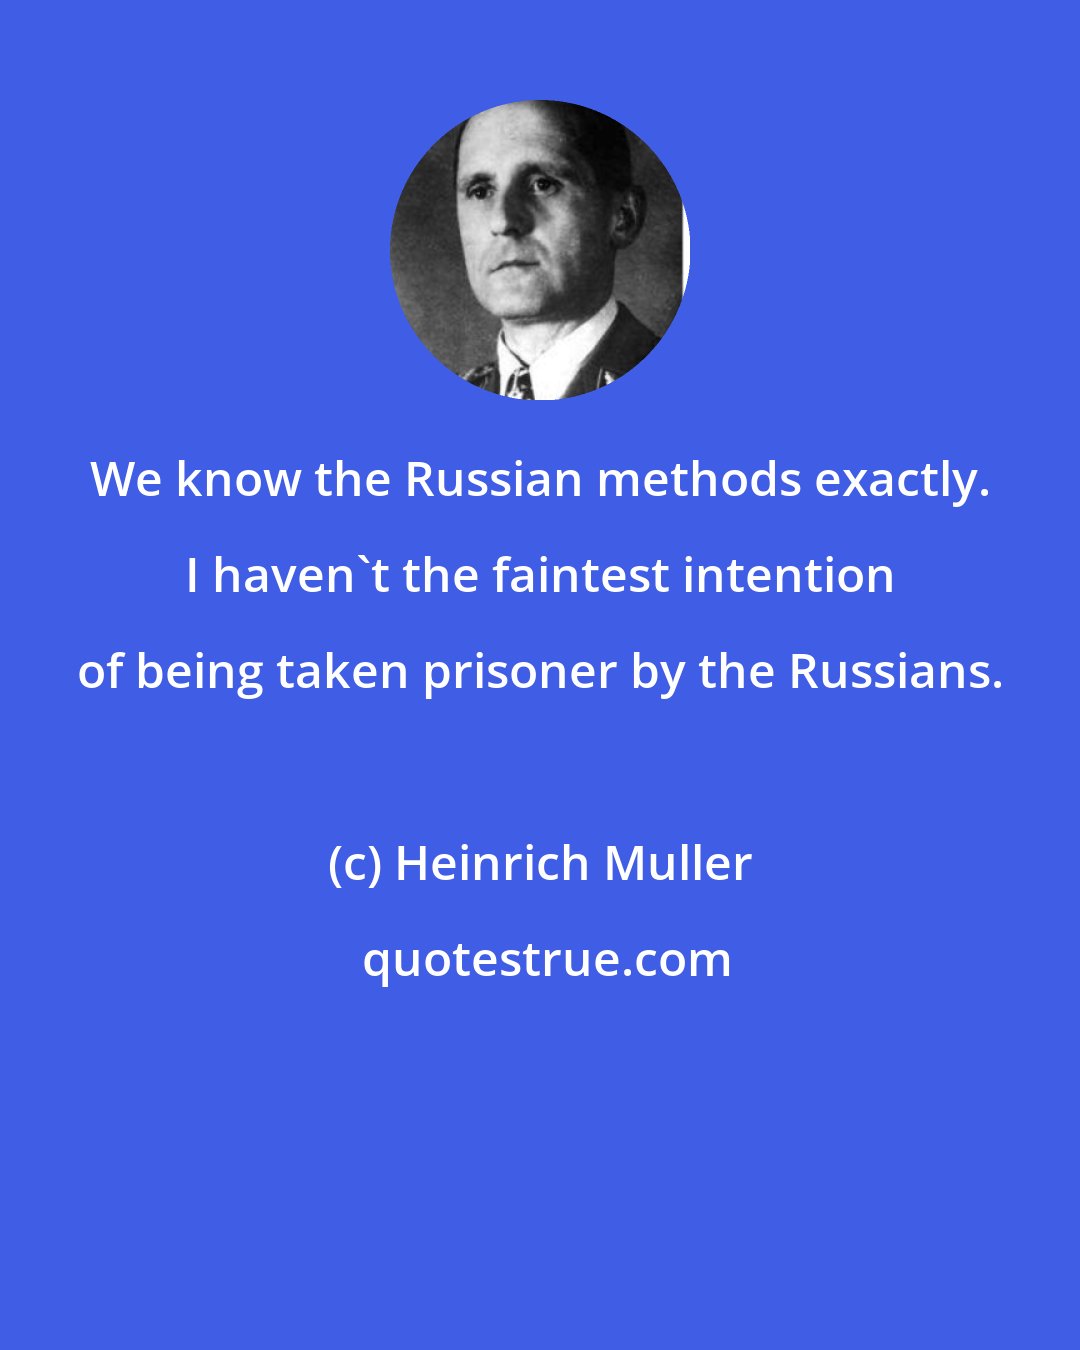 Heinrich Muller: We know the Russian methods exactly. I haven't the faintest intention of being taken prisoner by the Russians.